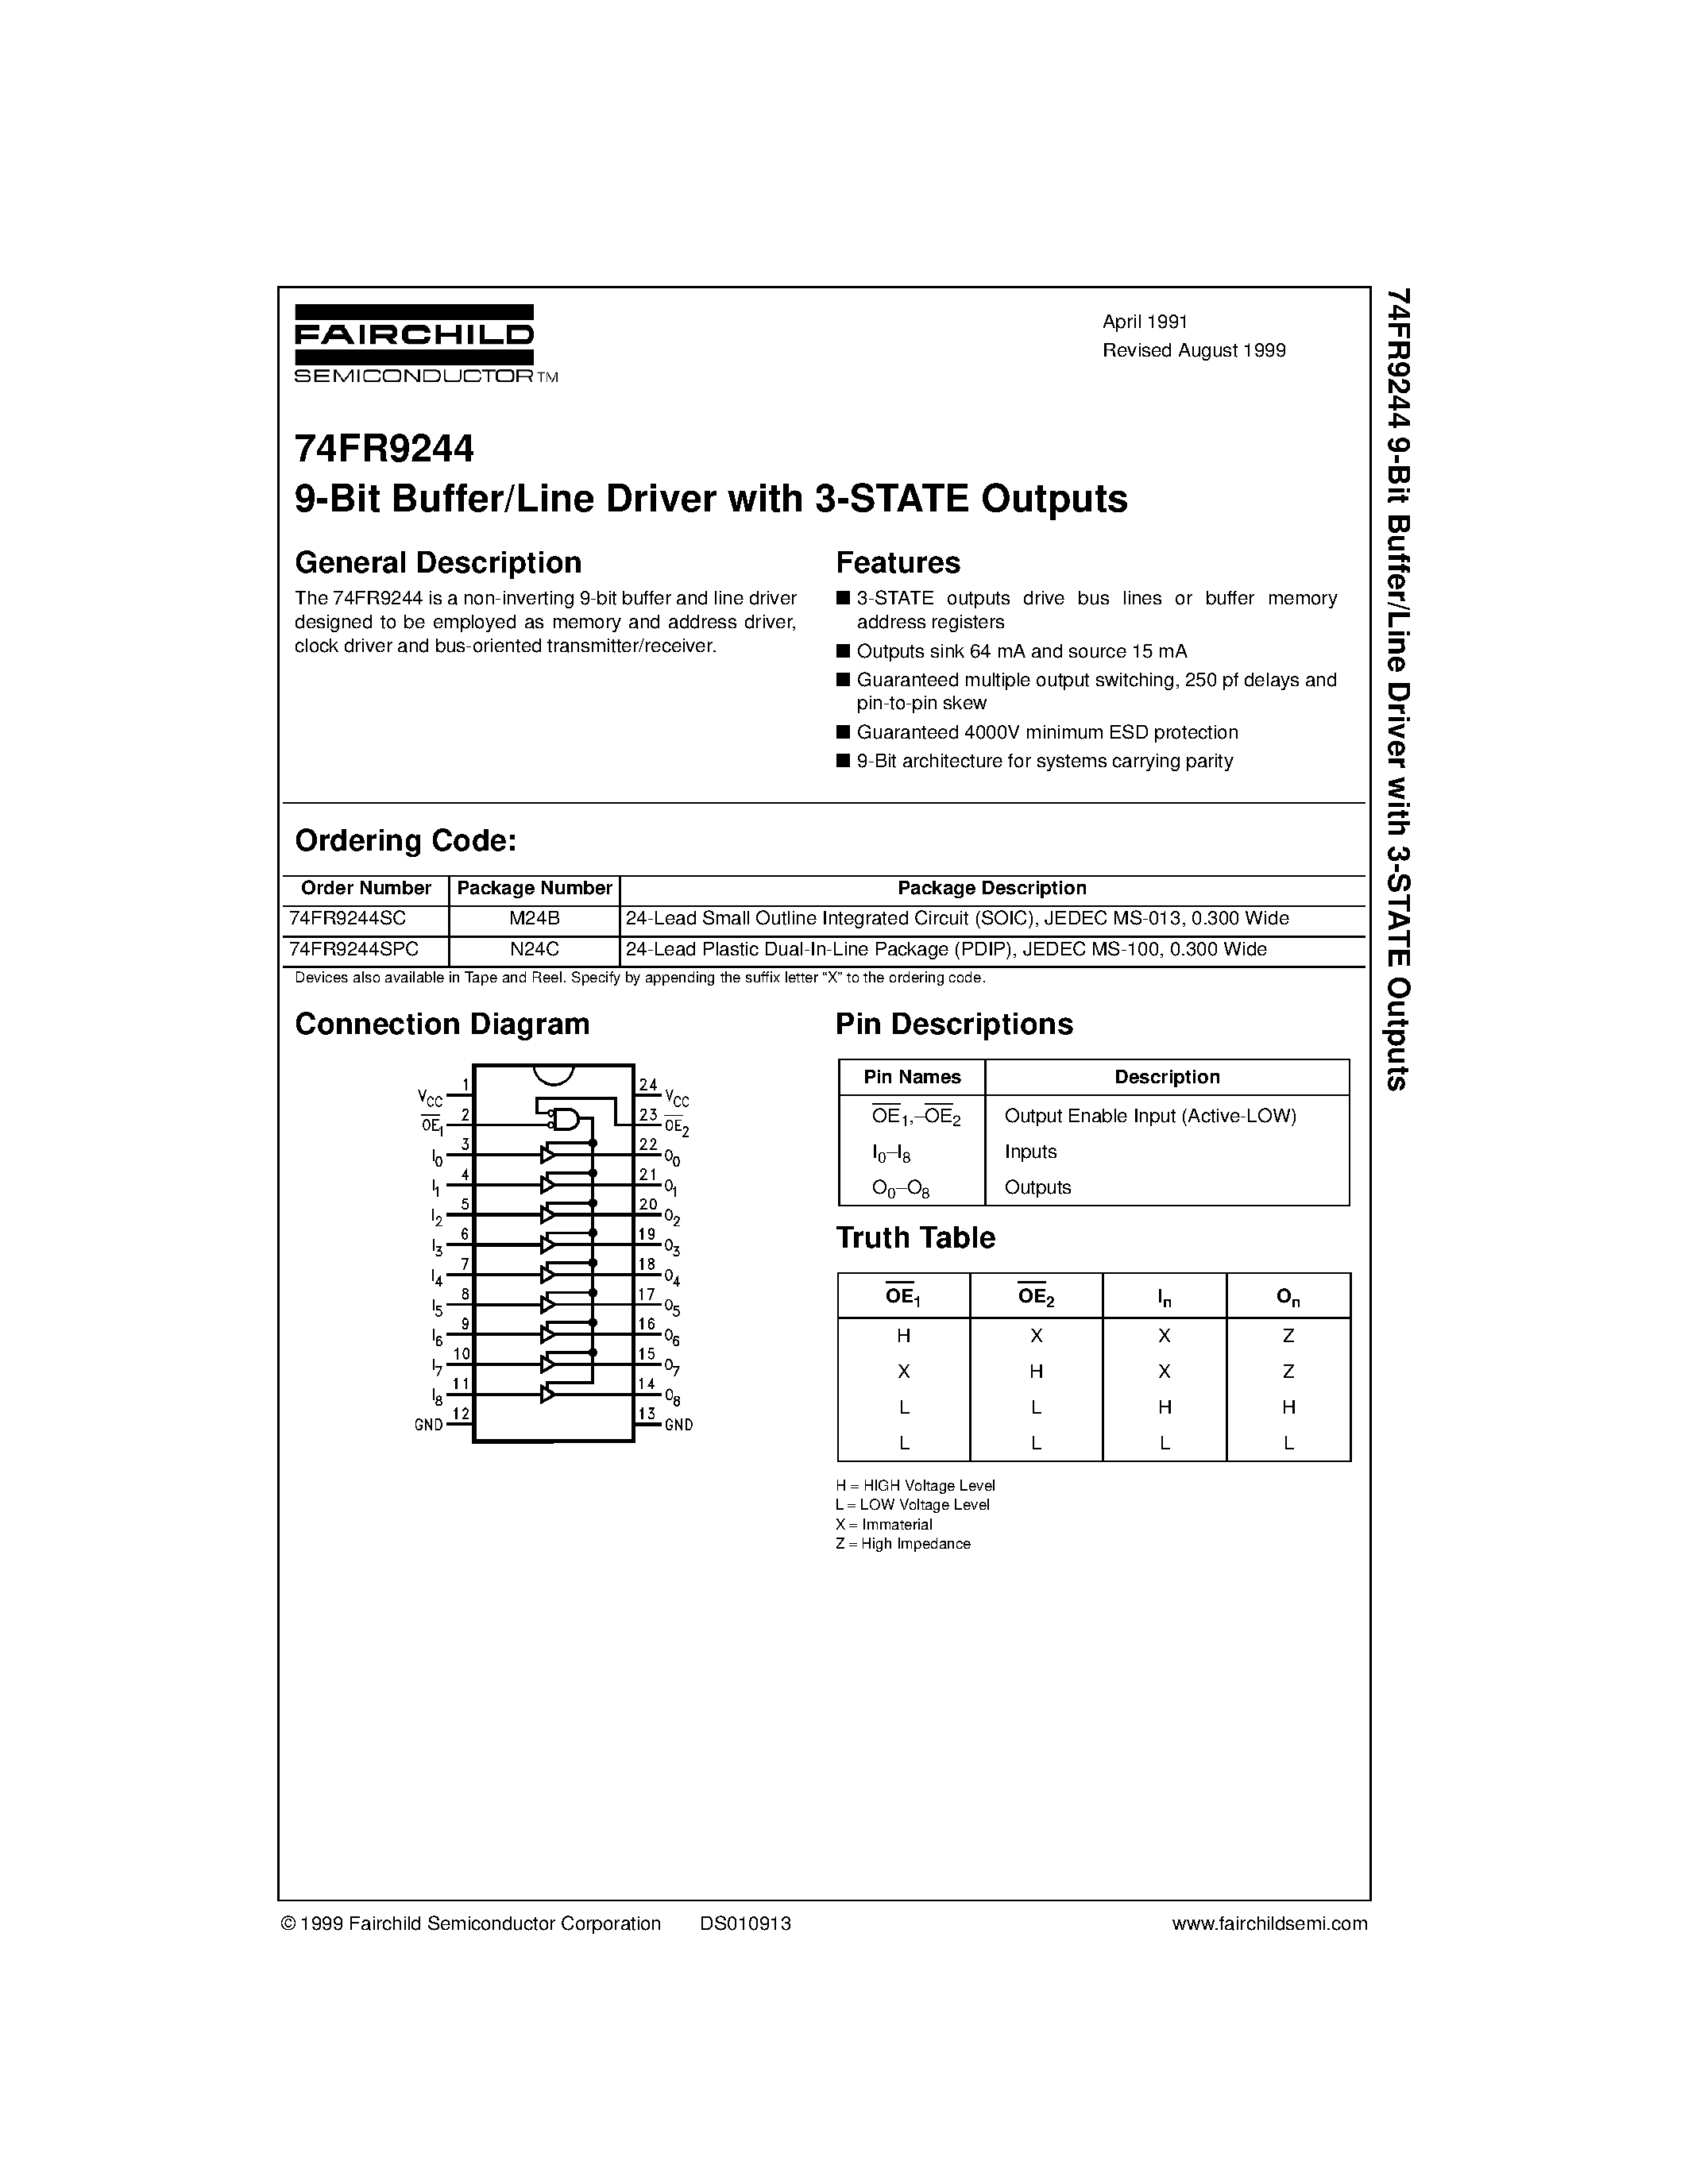 Datasheet 74FR9244 - 9-Bit Buffer/Line Driver with 3-STATE Outputs page 1